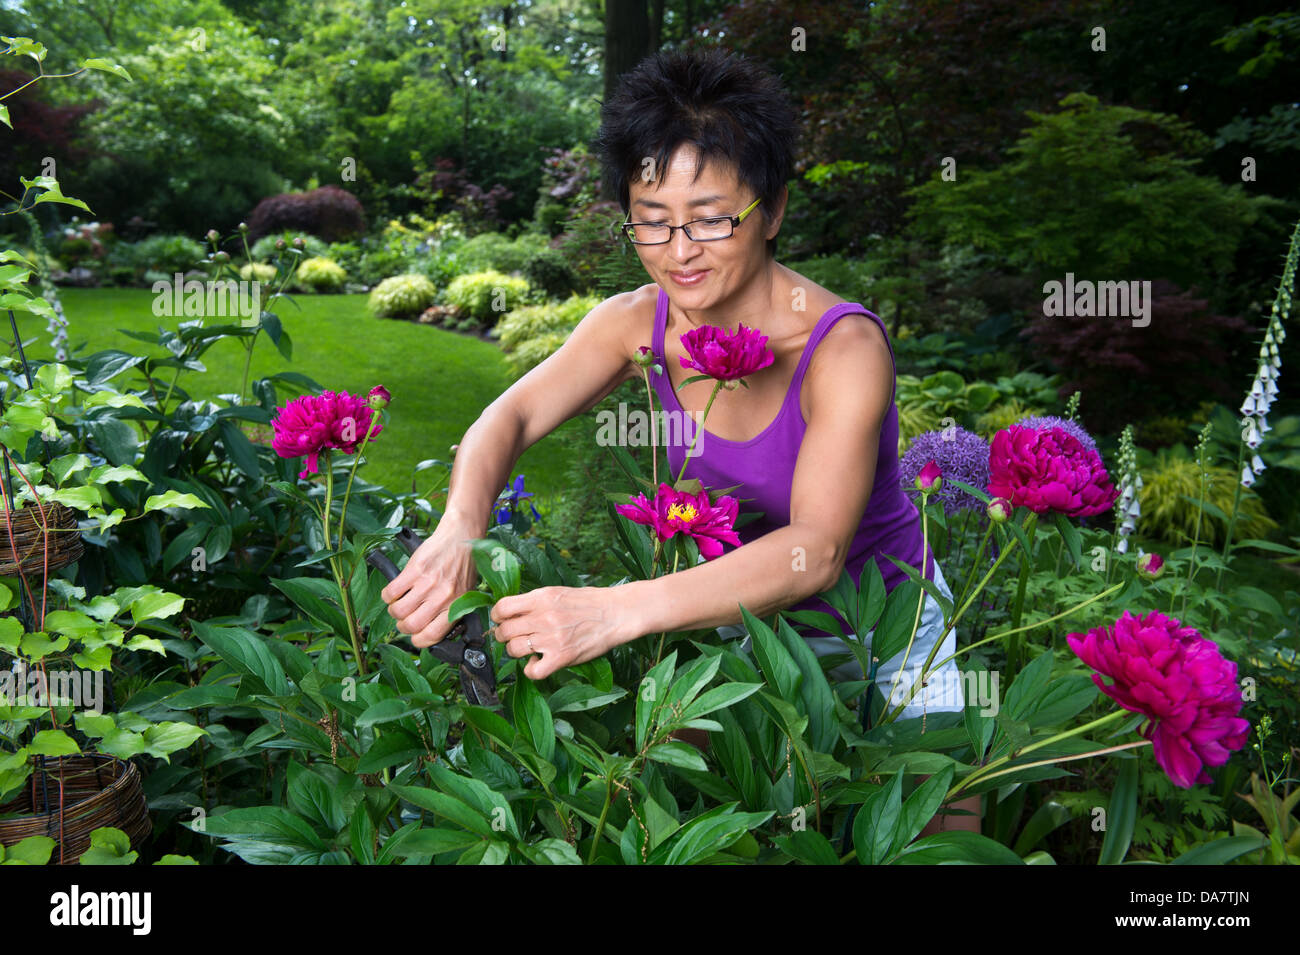 An Asian woman works on pruning plants in her beautiful garden Stock Photo